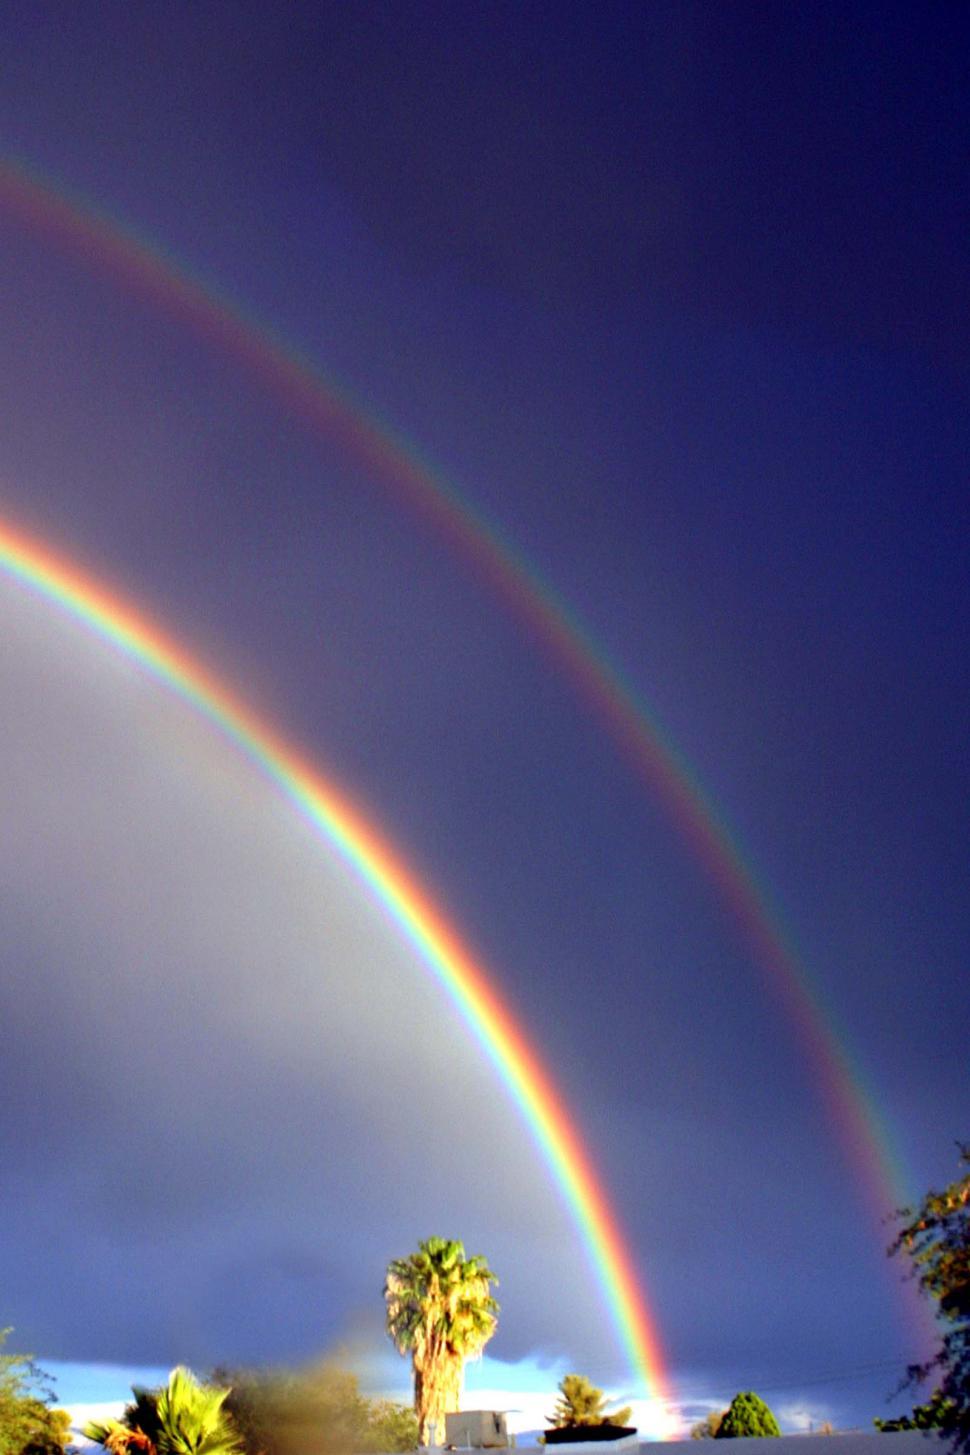 Free Image of Two Rainbows in the Sky Over a Palm Tree 